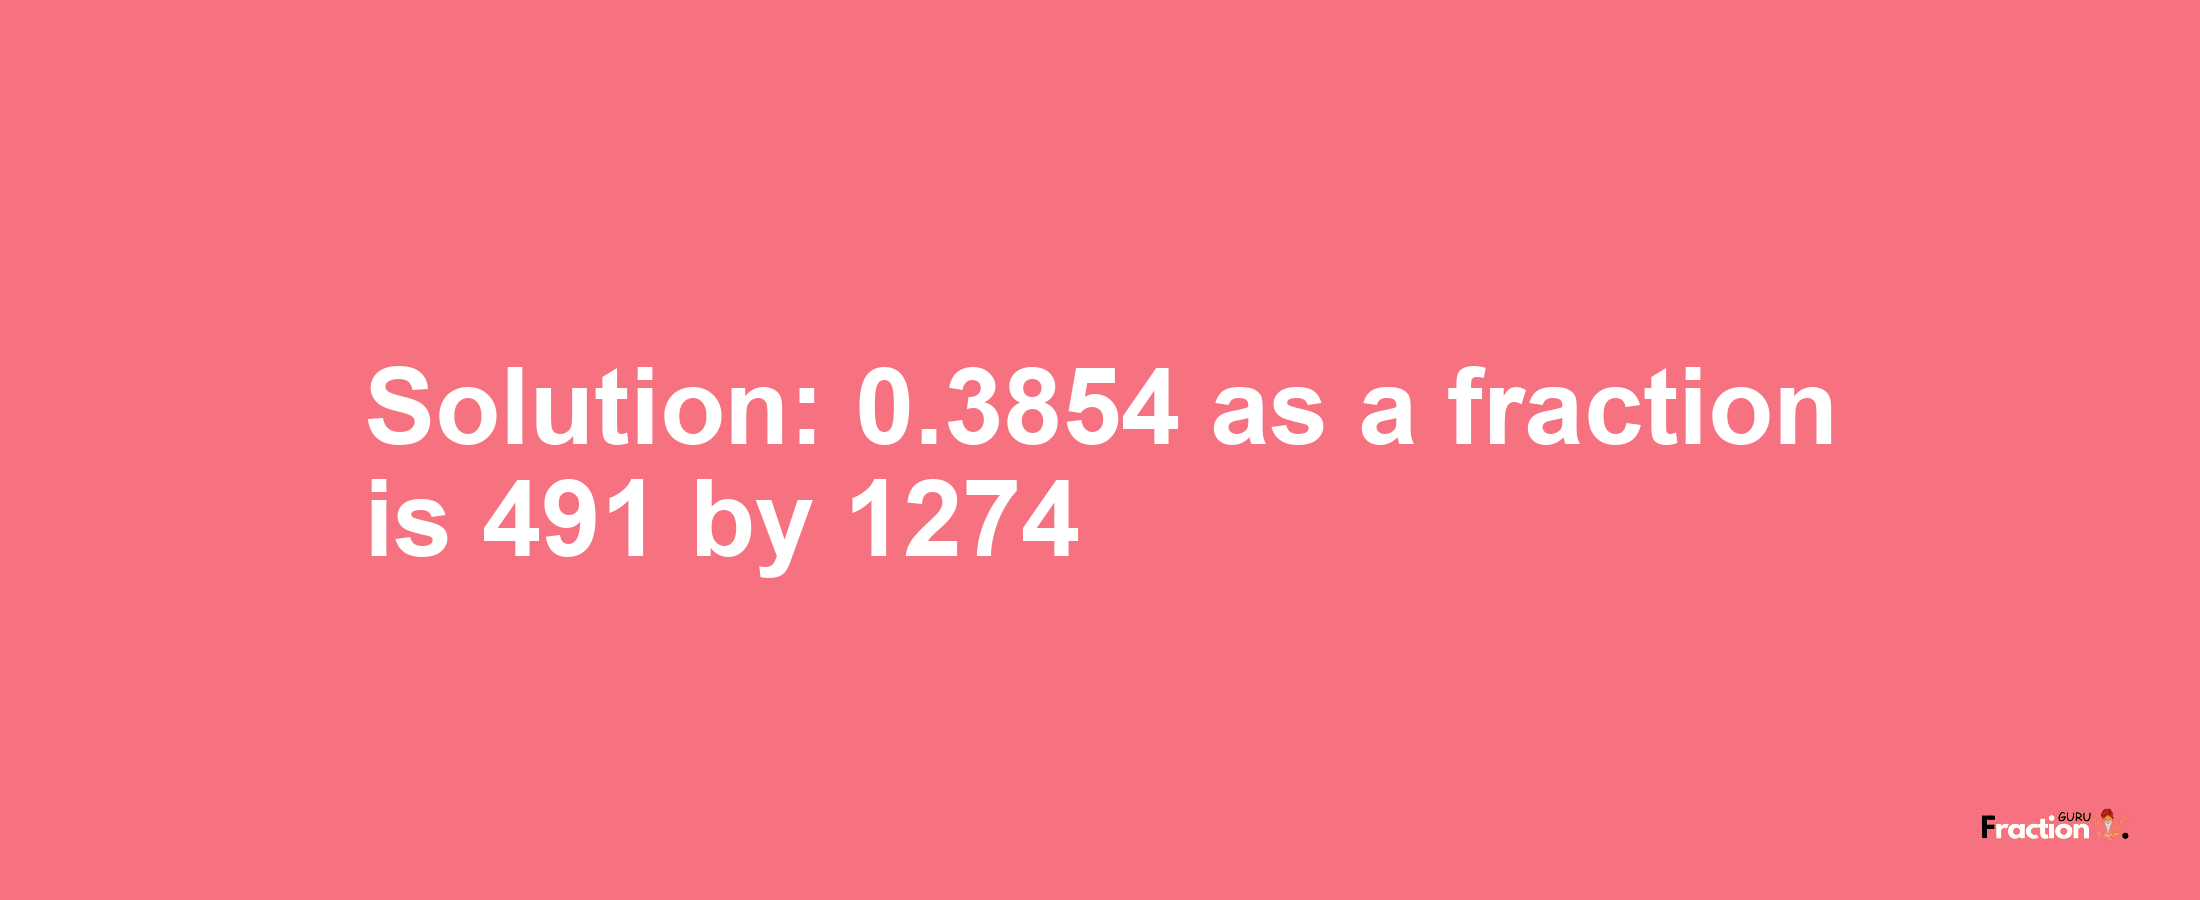 Solution:0.3854 as a fraction is 491/1274